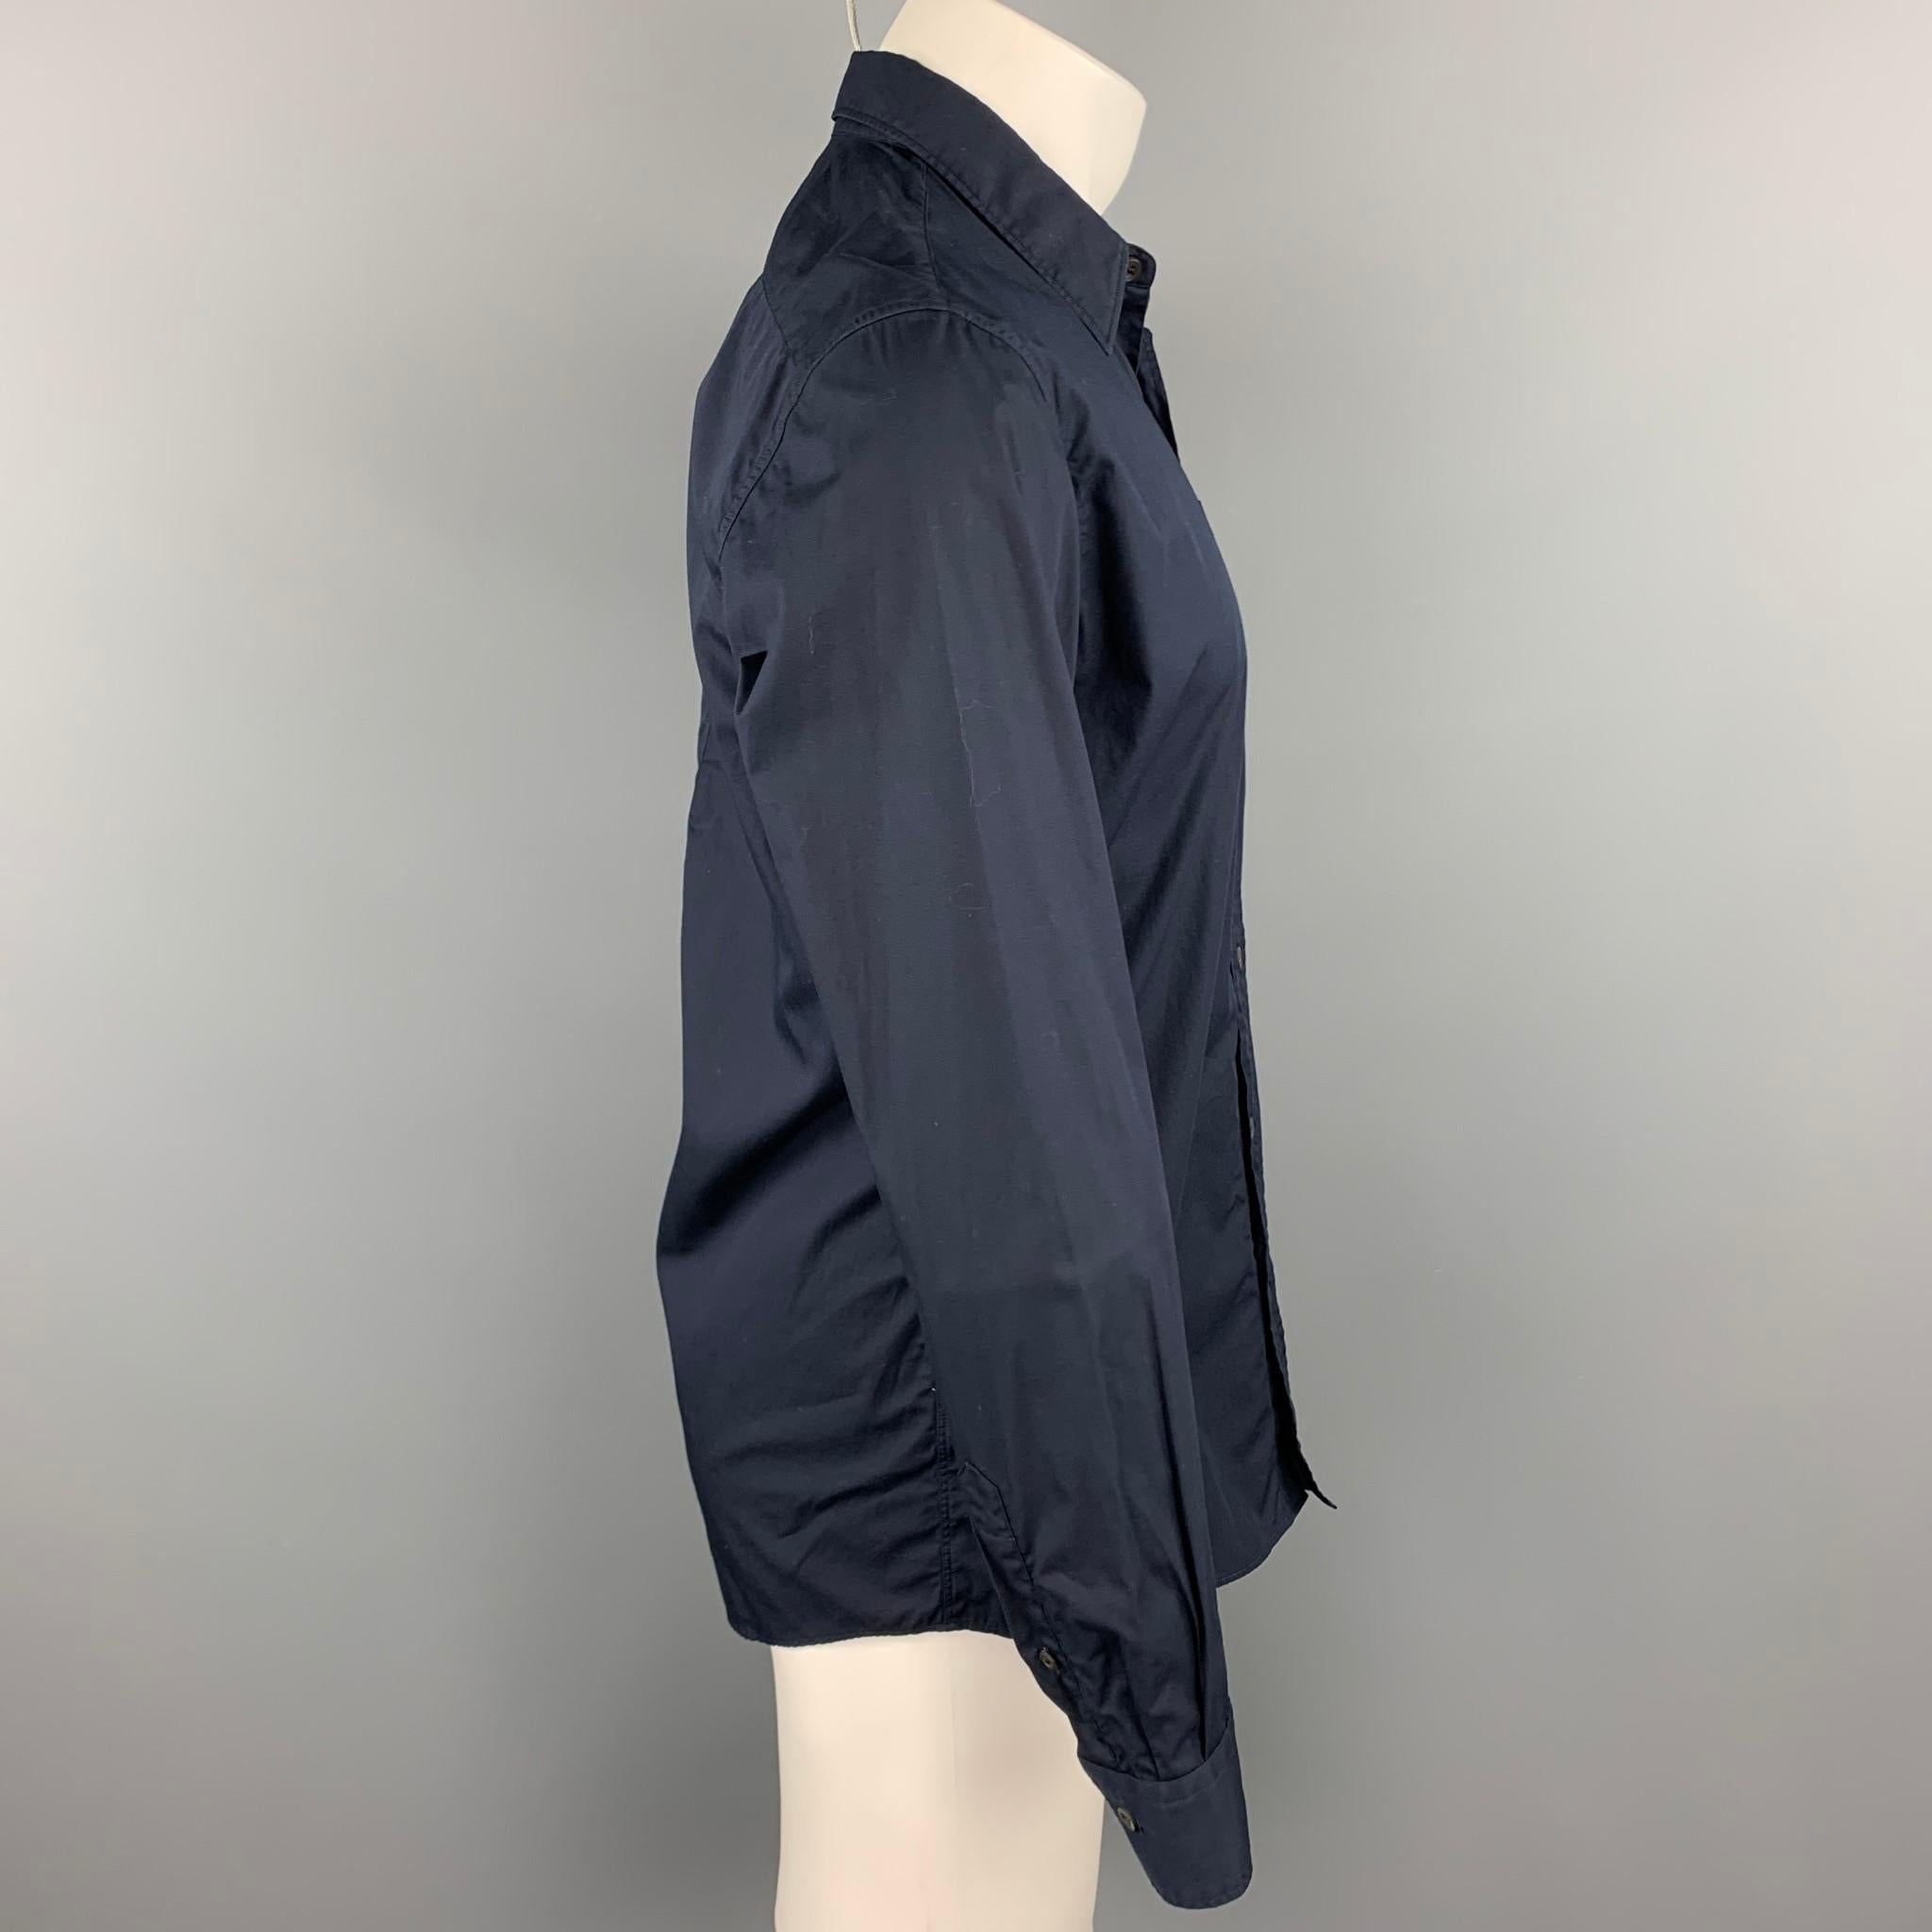 DRIES VAN NOTEN ong sleeve shirt comes in a navy cotton featuring a button up style, front pocket, and a spread collar. 

Very Good Pre-Owned Condition.
Marked: 48

Measurements:

Shoulder: 18 in.
Chest: 40 in.
Sleeve: 26 in.
Length: 30 in. 
